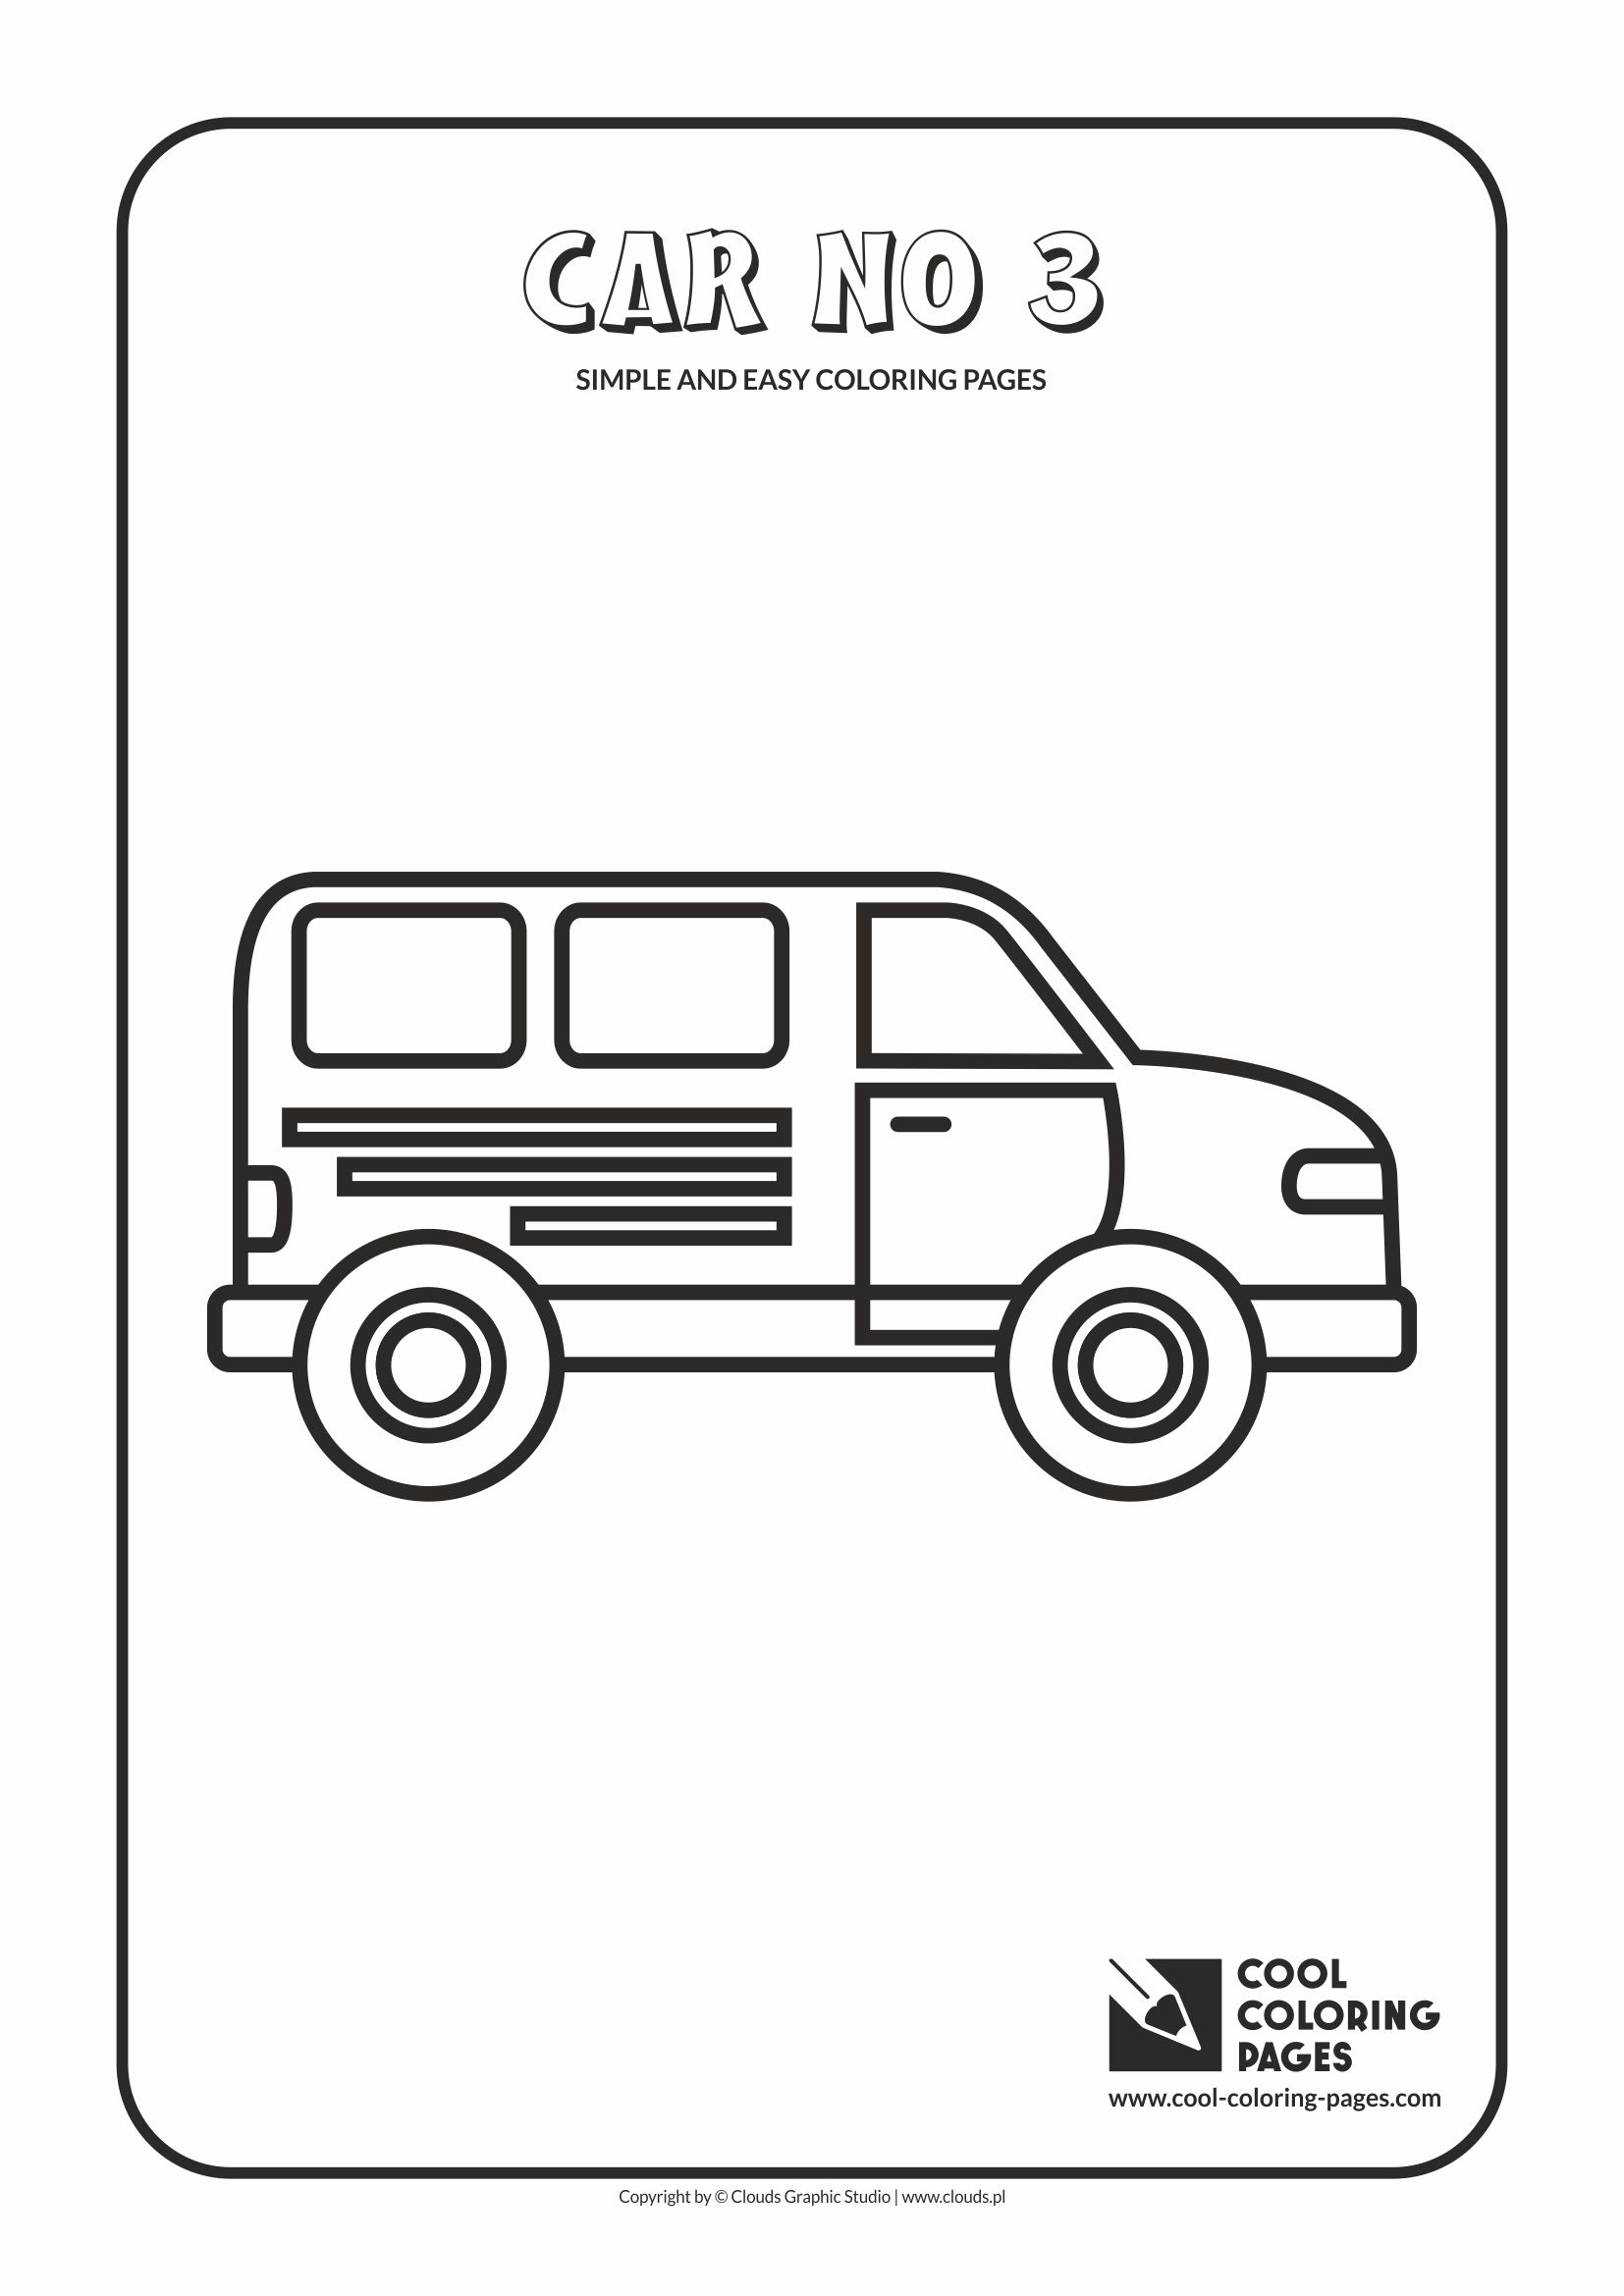 Simple and easy coloring pages for toddlers - Car no 3